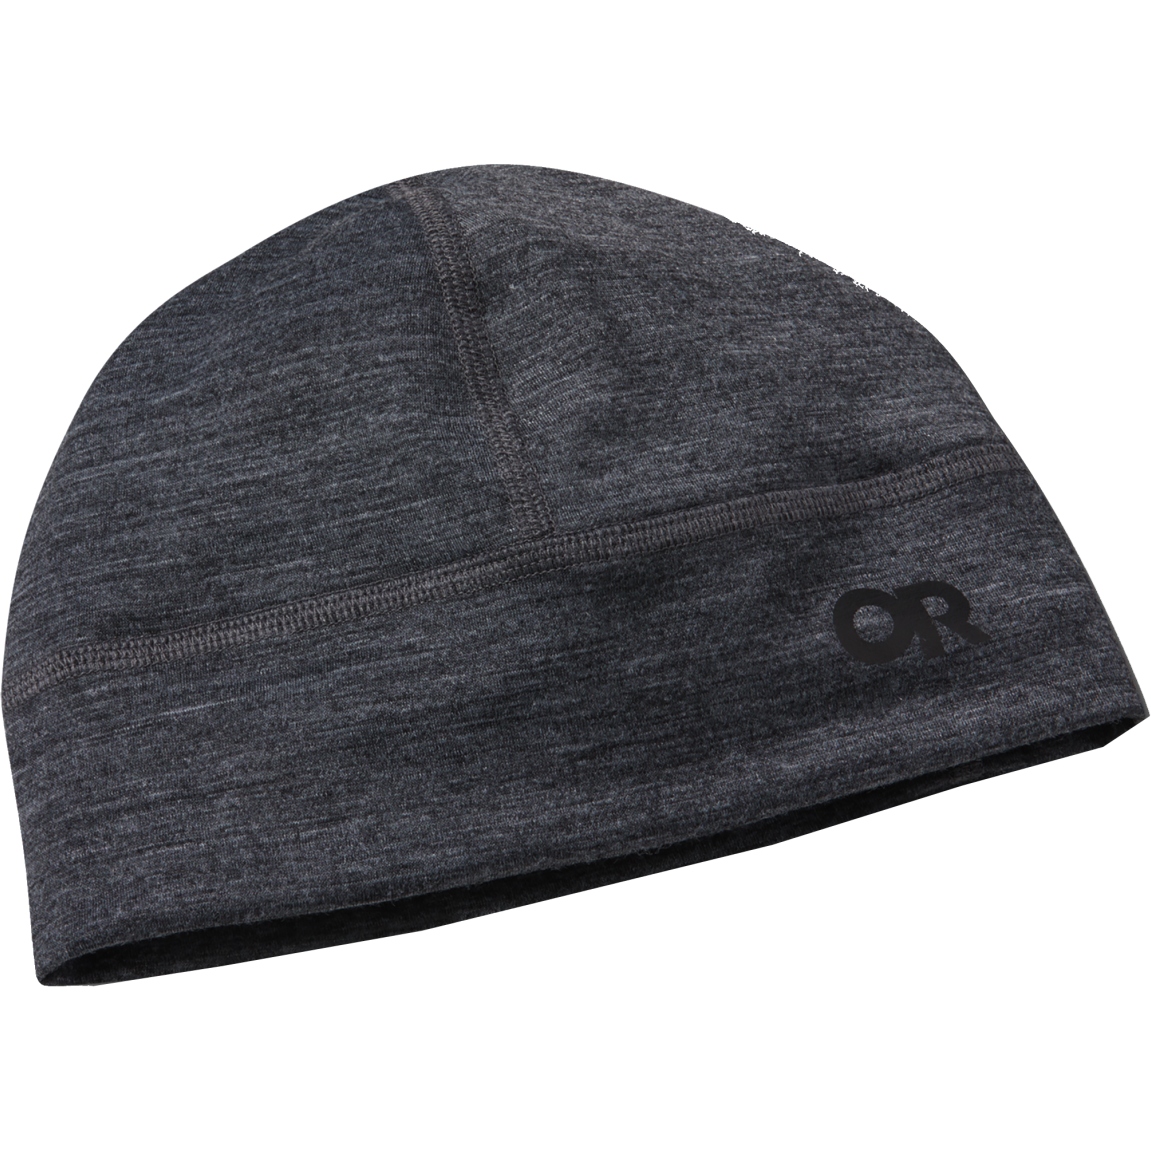 Picture of Outdoor Research Alpine Onset Merino 150 Beanie - charcoal heather